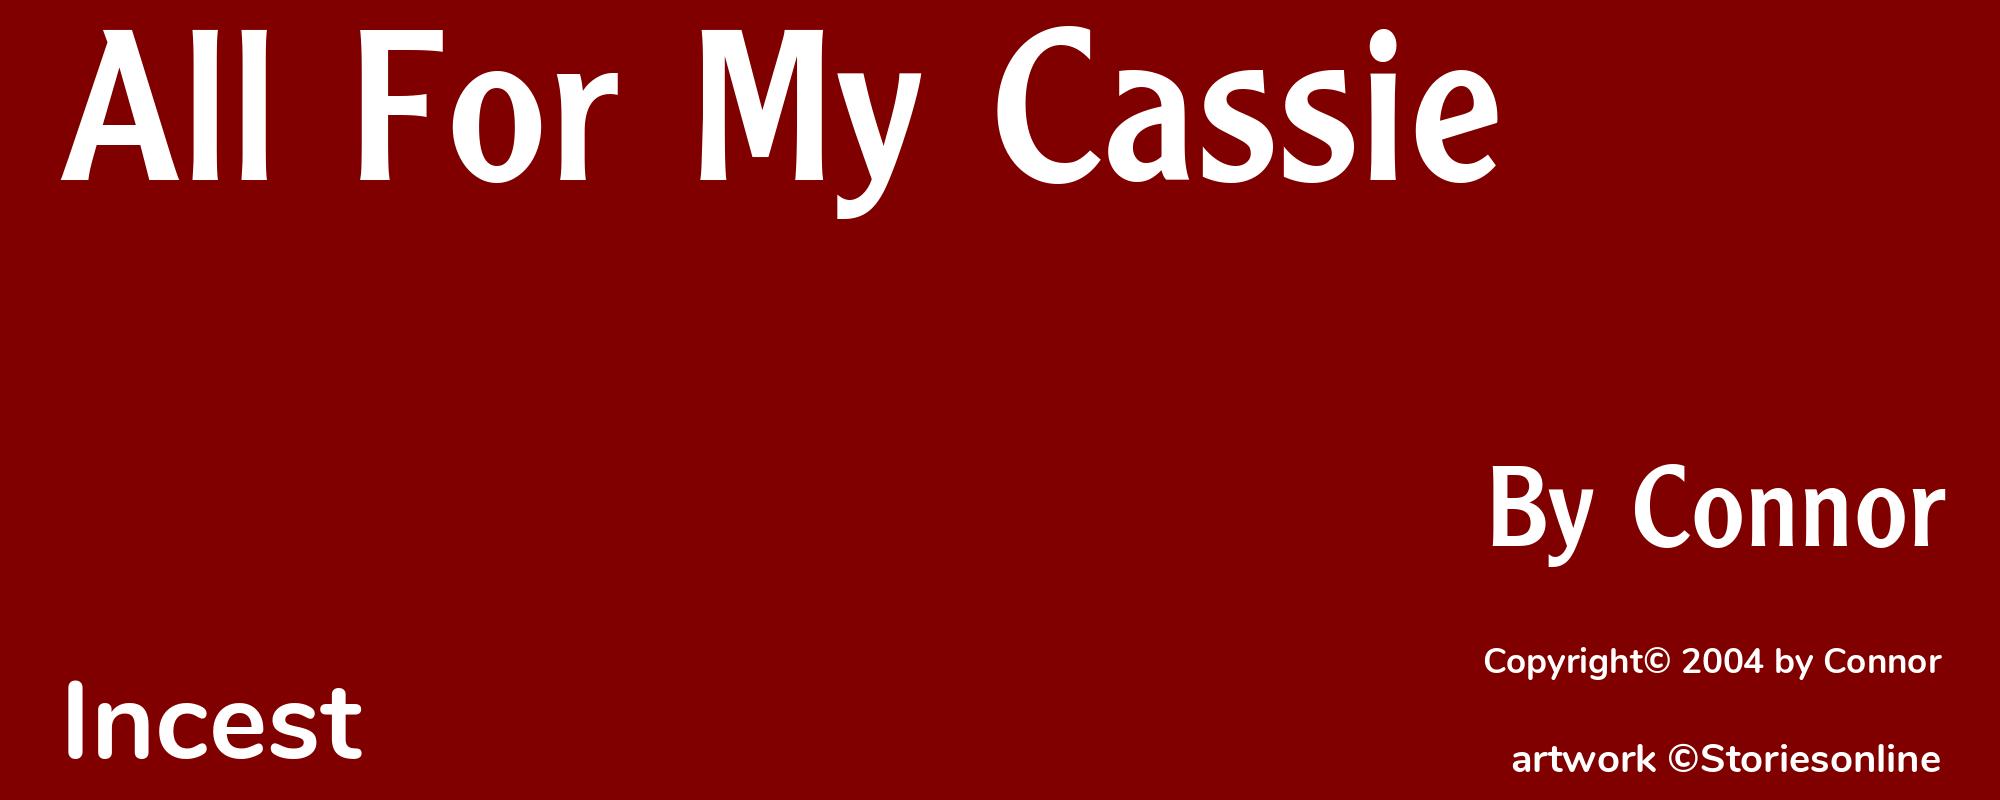 All For My Cassie - Cover